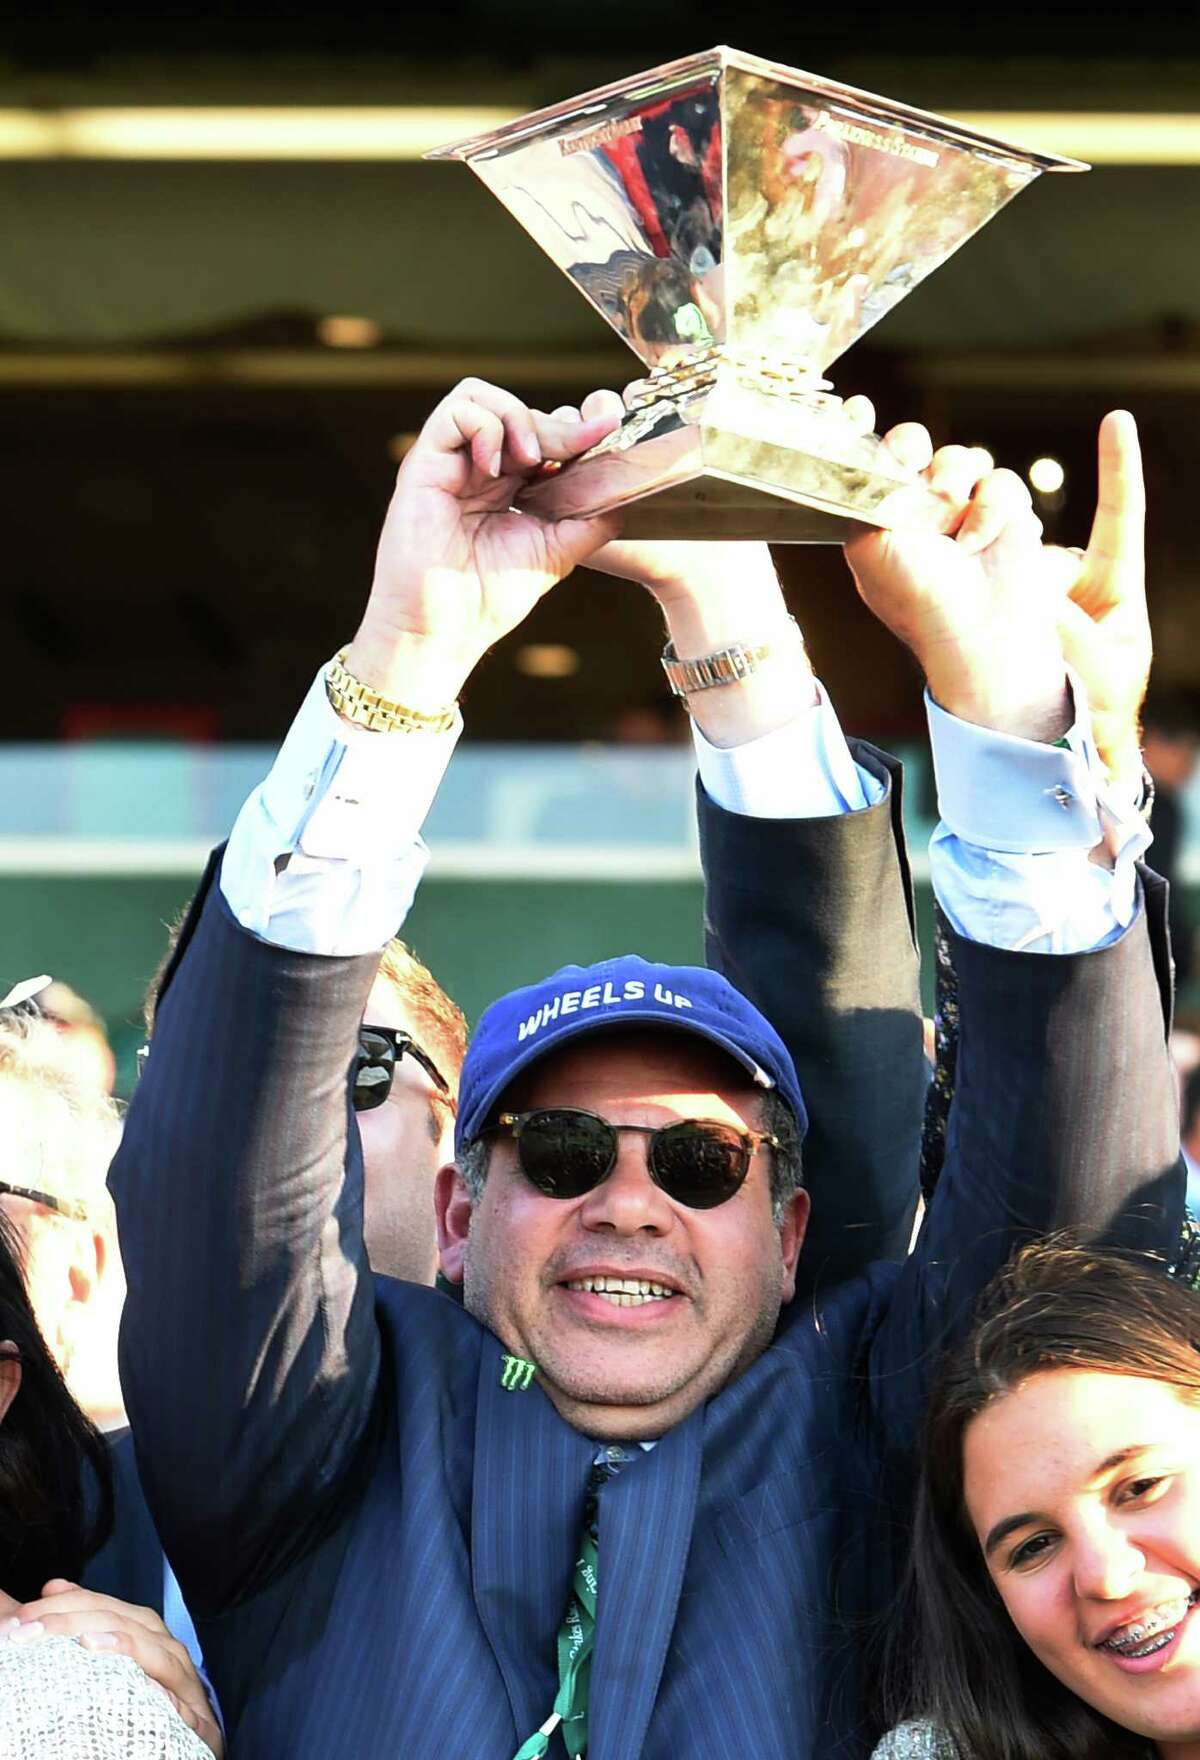 American Pharoah's owner Ahmed Zayat holds the Triple Crown trophy aloft after his horse made his way to the record books by winning the 147th running of the Belmont Stakes and thoroughbred racing's Triple Crown June 6, 2015 at Belmont Park in Elmont, N.Y. (Skip Dickstein/Times Union)